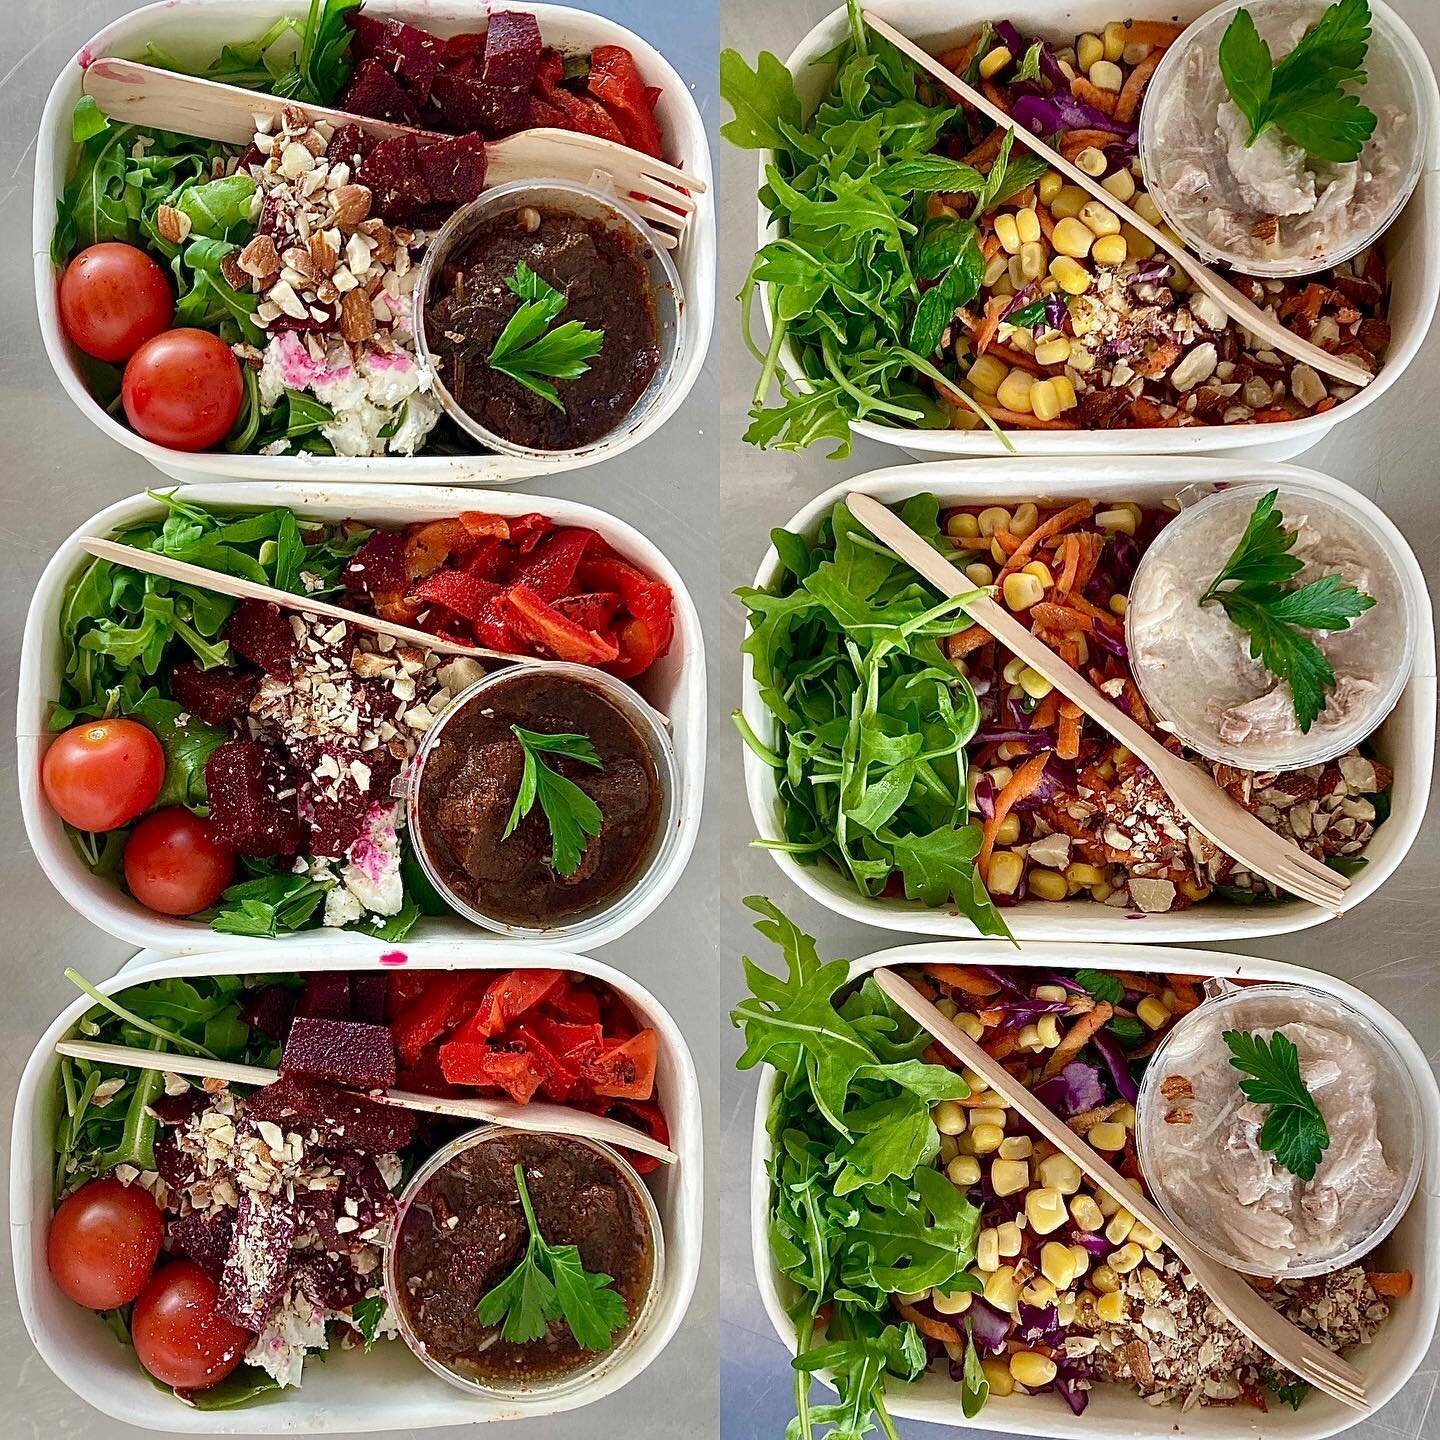 Warm winter bowls launch this week!&hellip; 

checkout wwwlovefood.co for full winter range 🌼

Slow cooked lamb, lentil &amp; rustic beetroot 
Poached coconut chicken slaw 

#fresh #clean #daily #lovefood #winterrange #drop #soldout @avalonwholefood